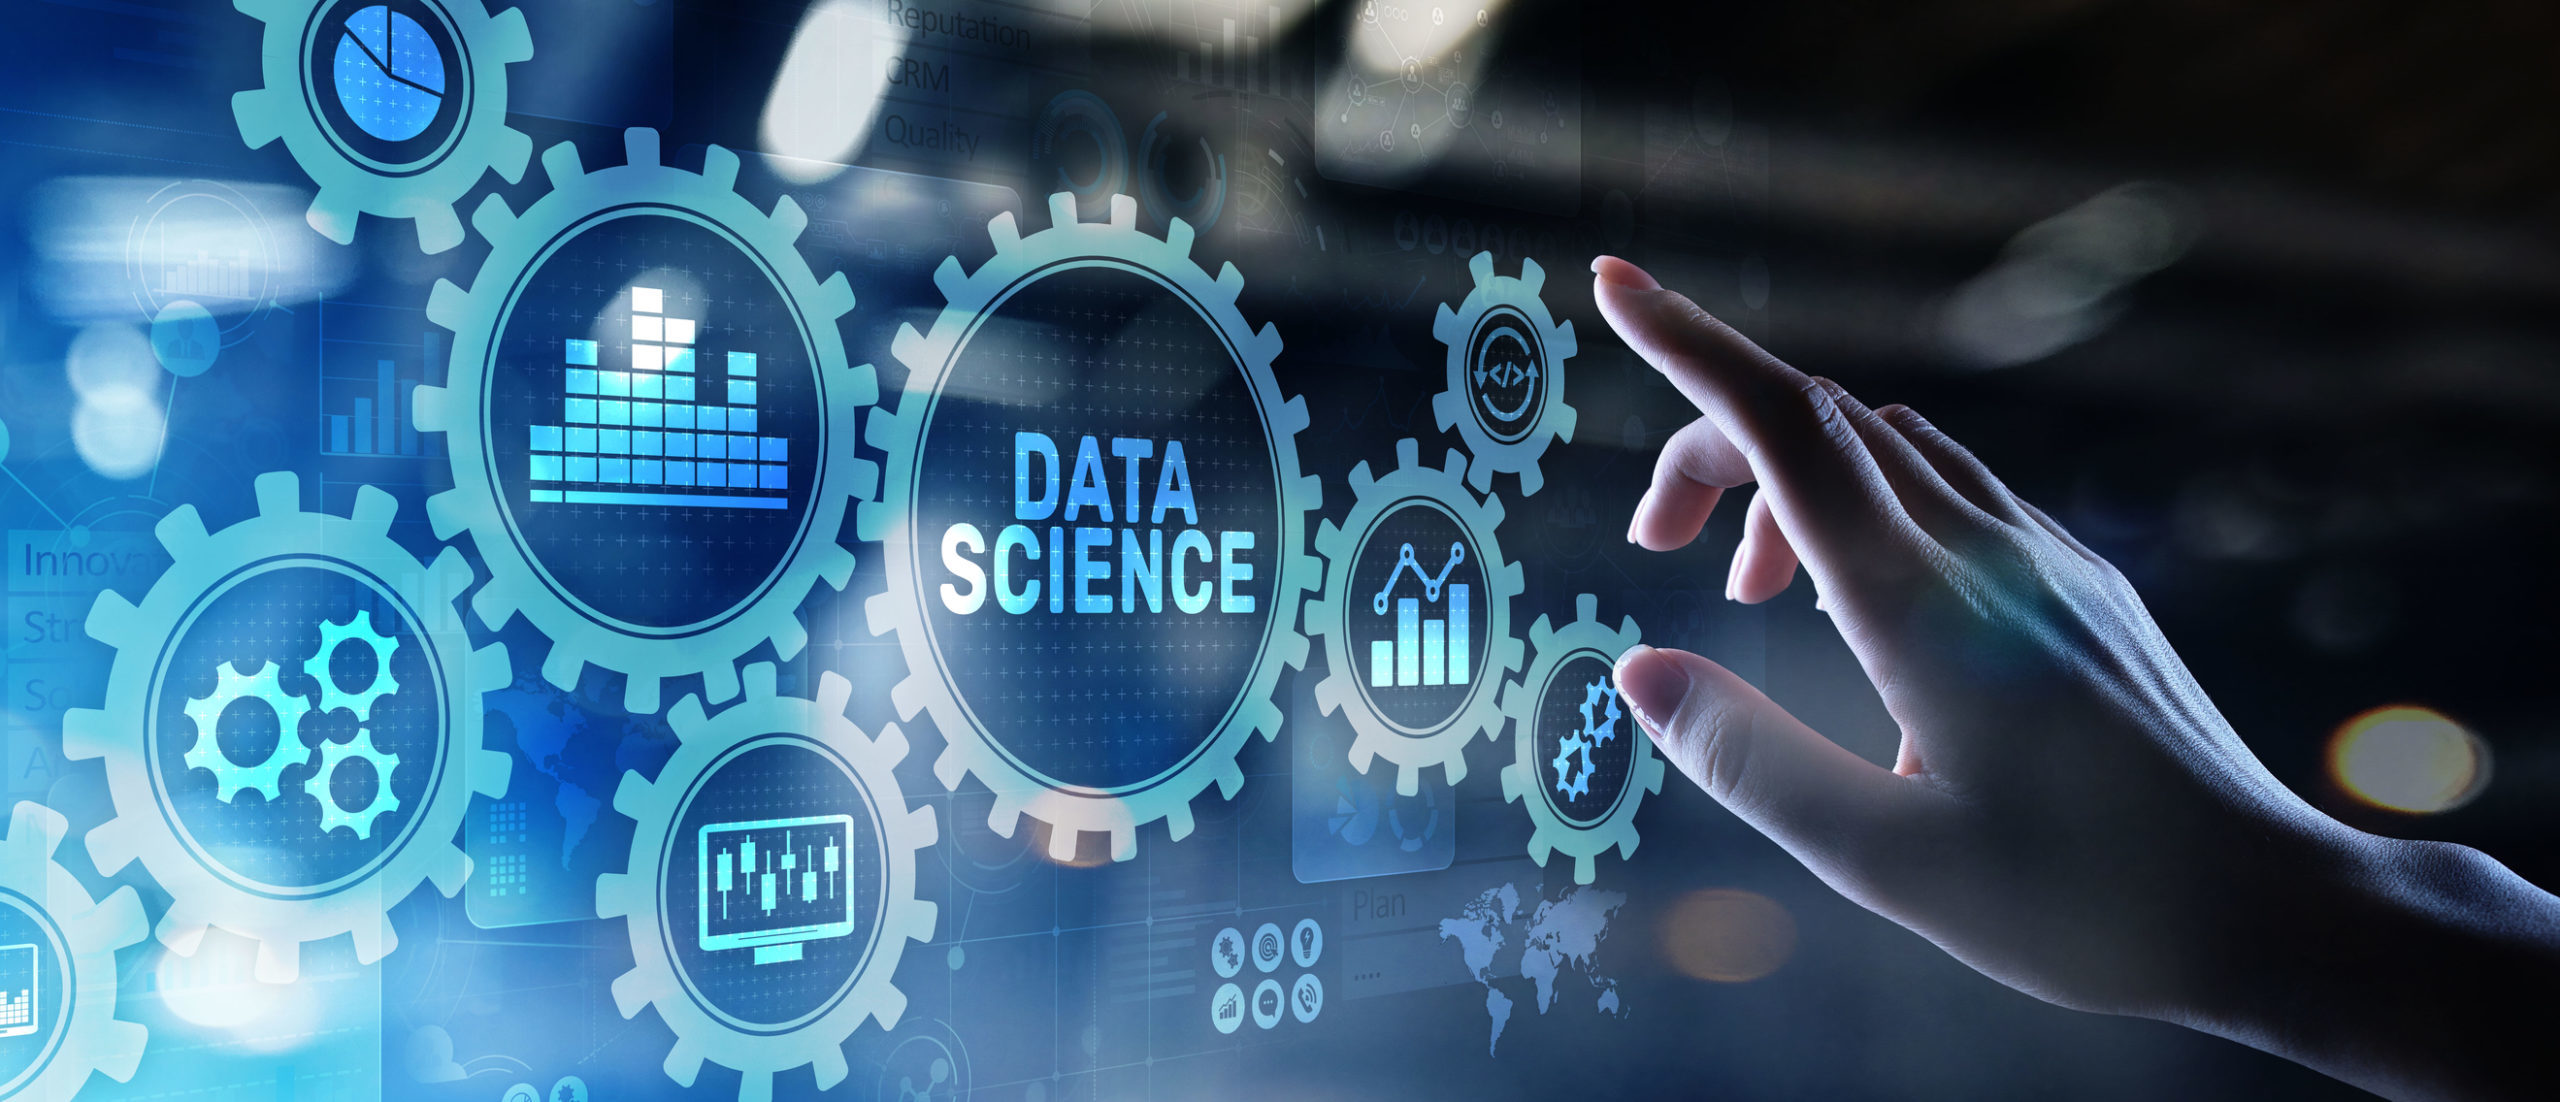 Data-Science-ROI-7-Ways-to-Boost-It-scaled.jpg